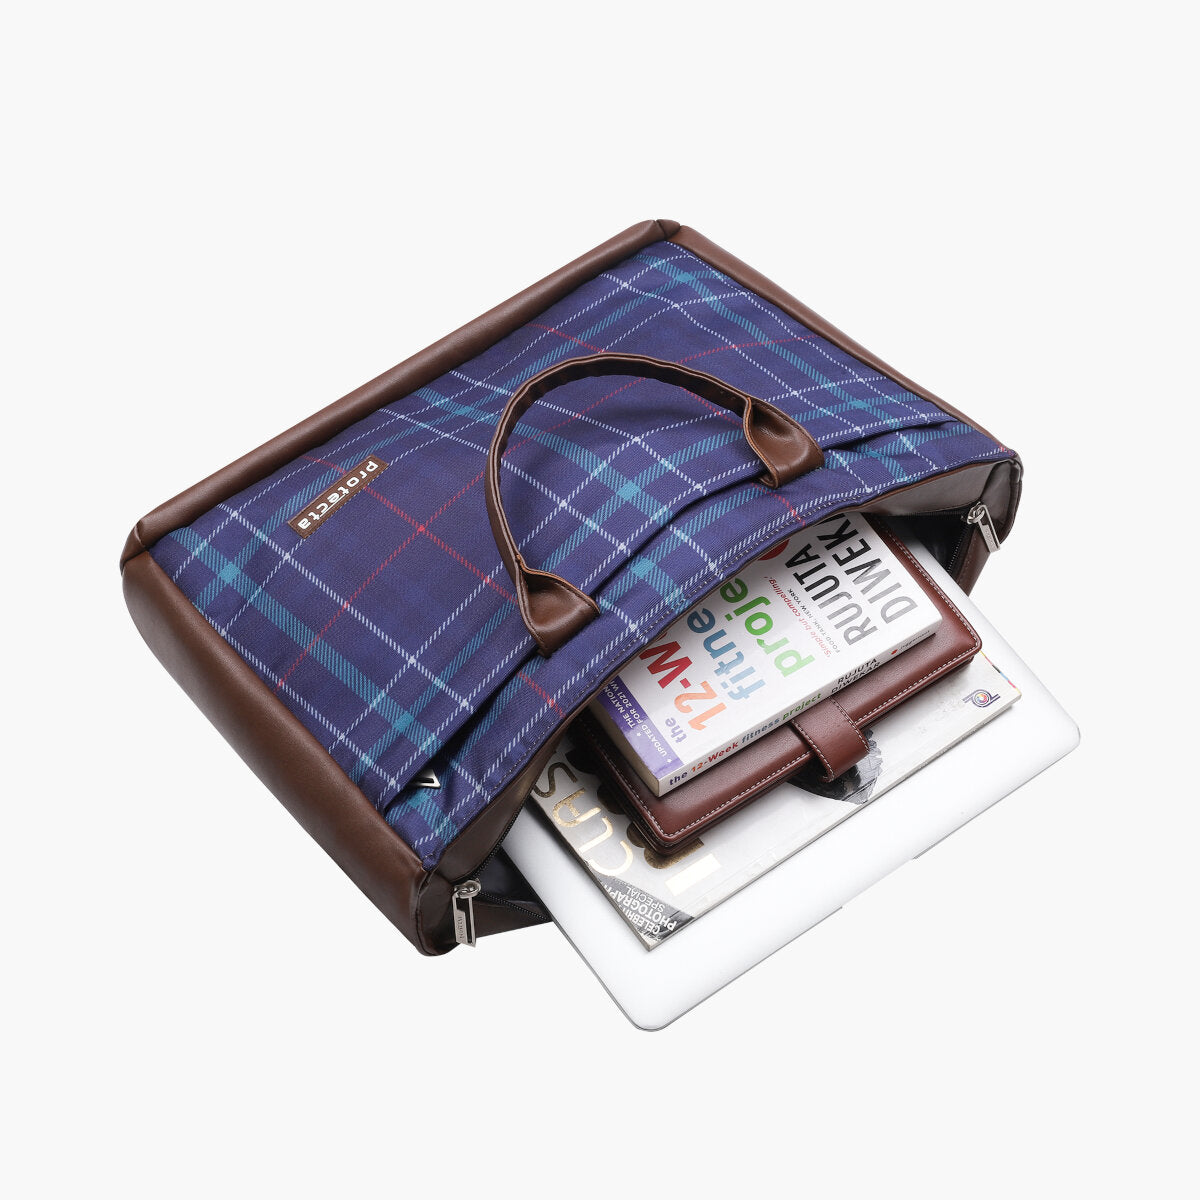 Plaid Print | Protecta Evenly Poised Office Laptop Bag for Women - Main